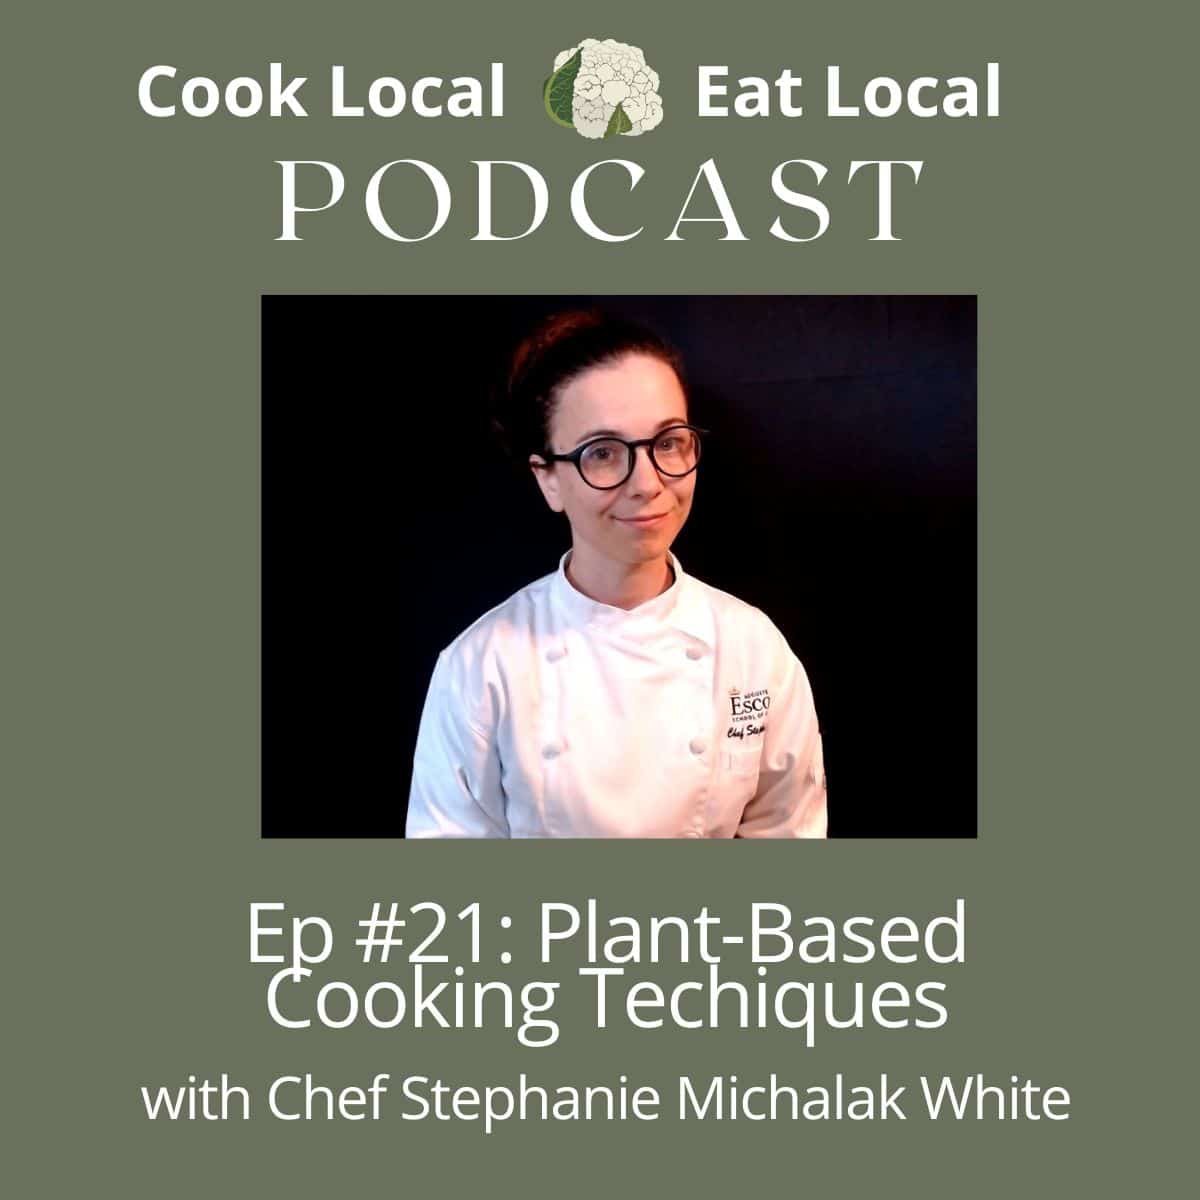 Cook Local Eat Local podcast cover with a photo of guest, Chef Stephanie Michalak White, and the title "Plant-Based Cooking Techniques".